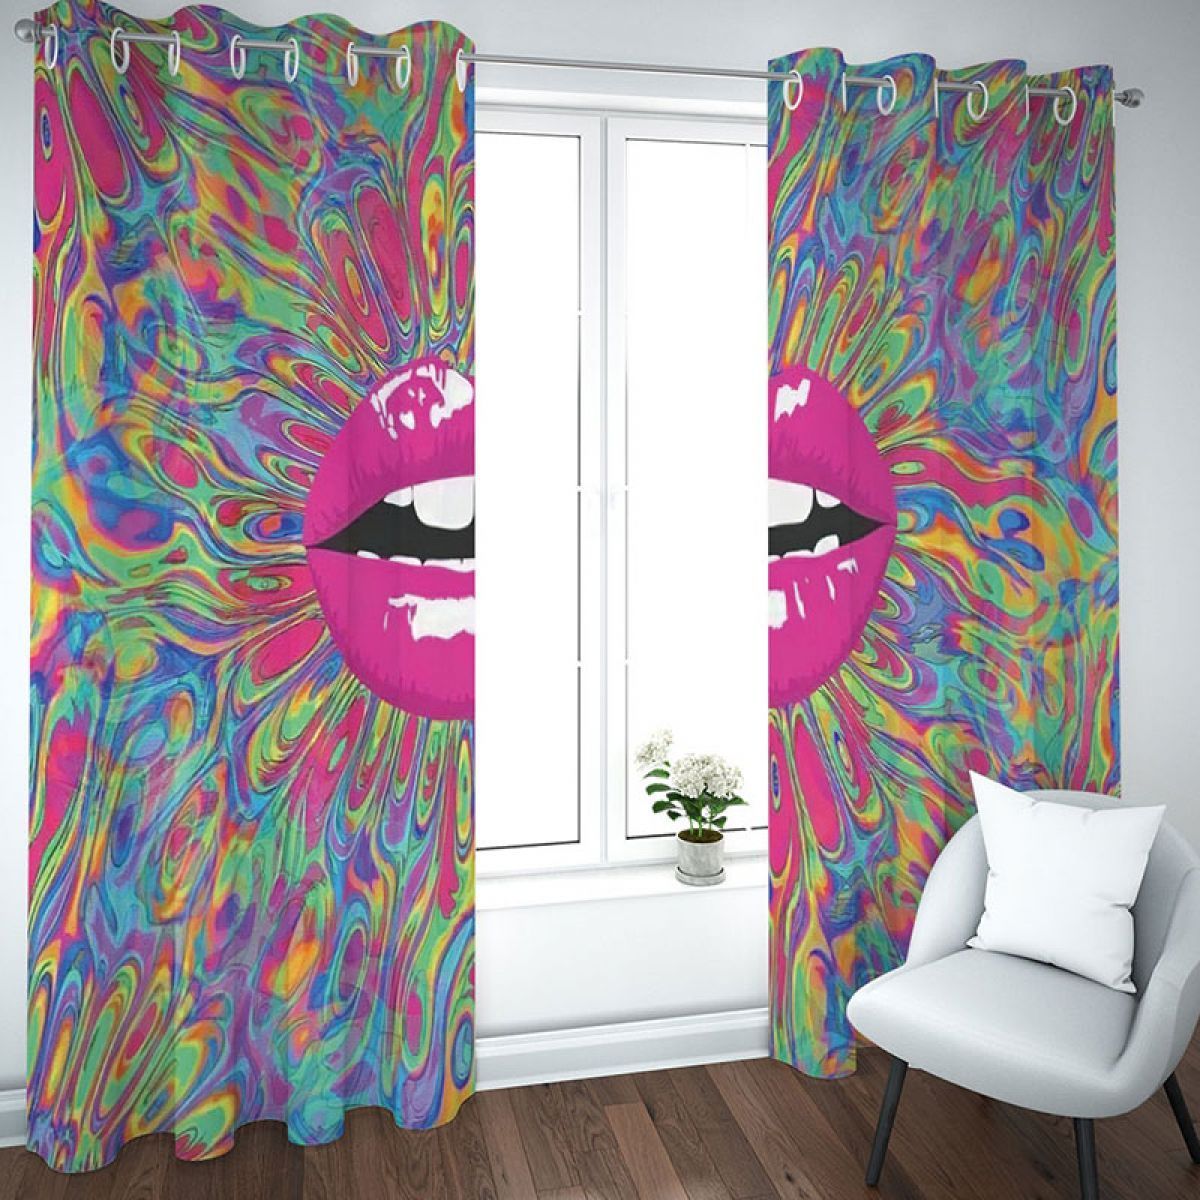 lipstick mouth watercolor printed window curtain home decor 1505